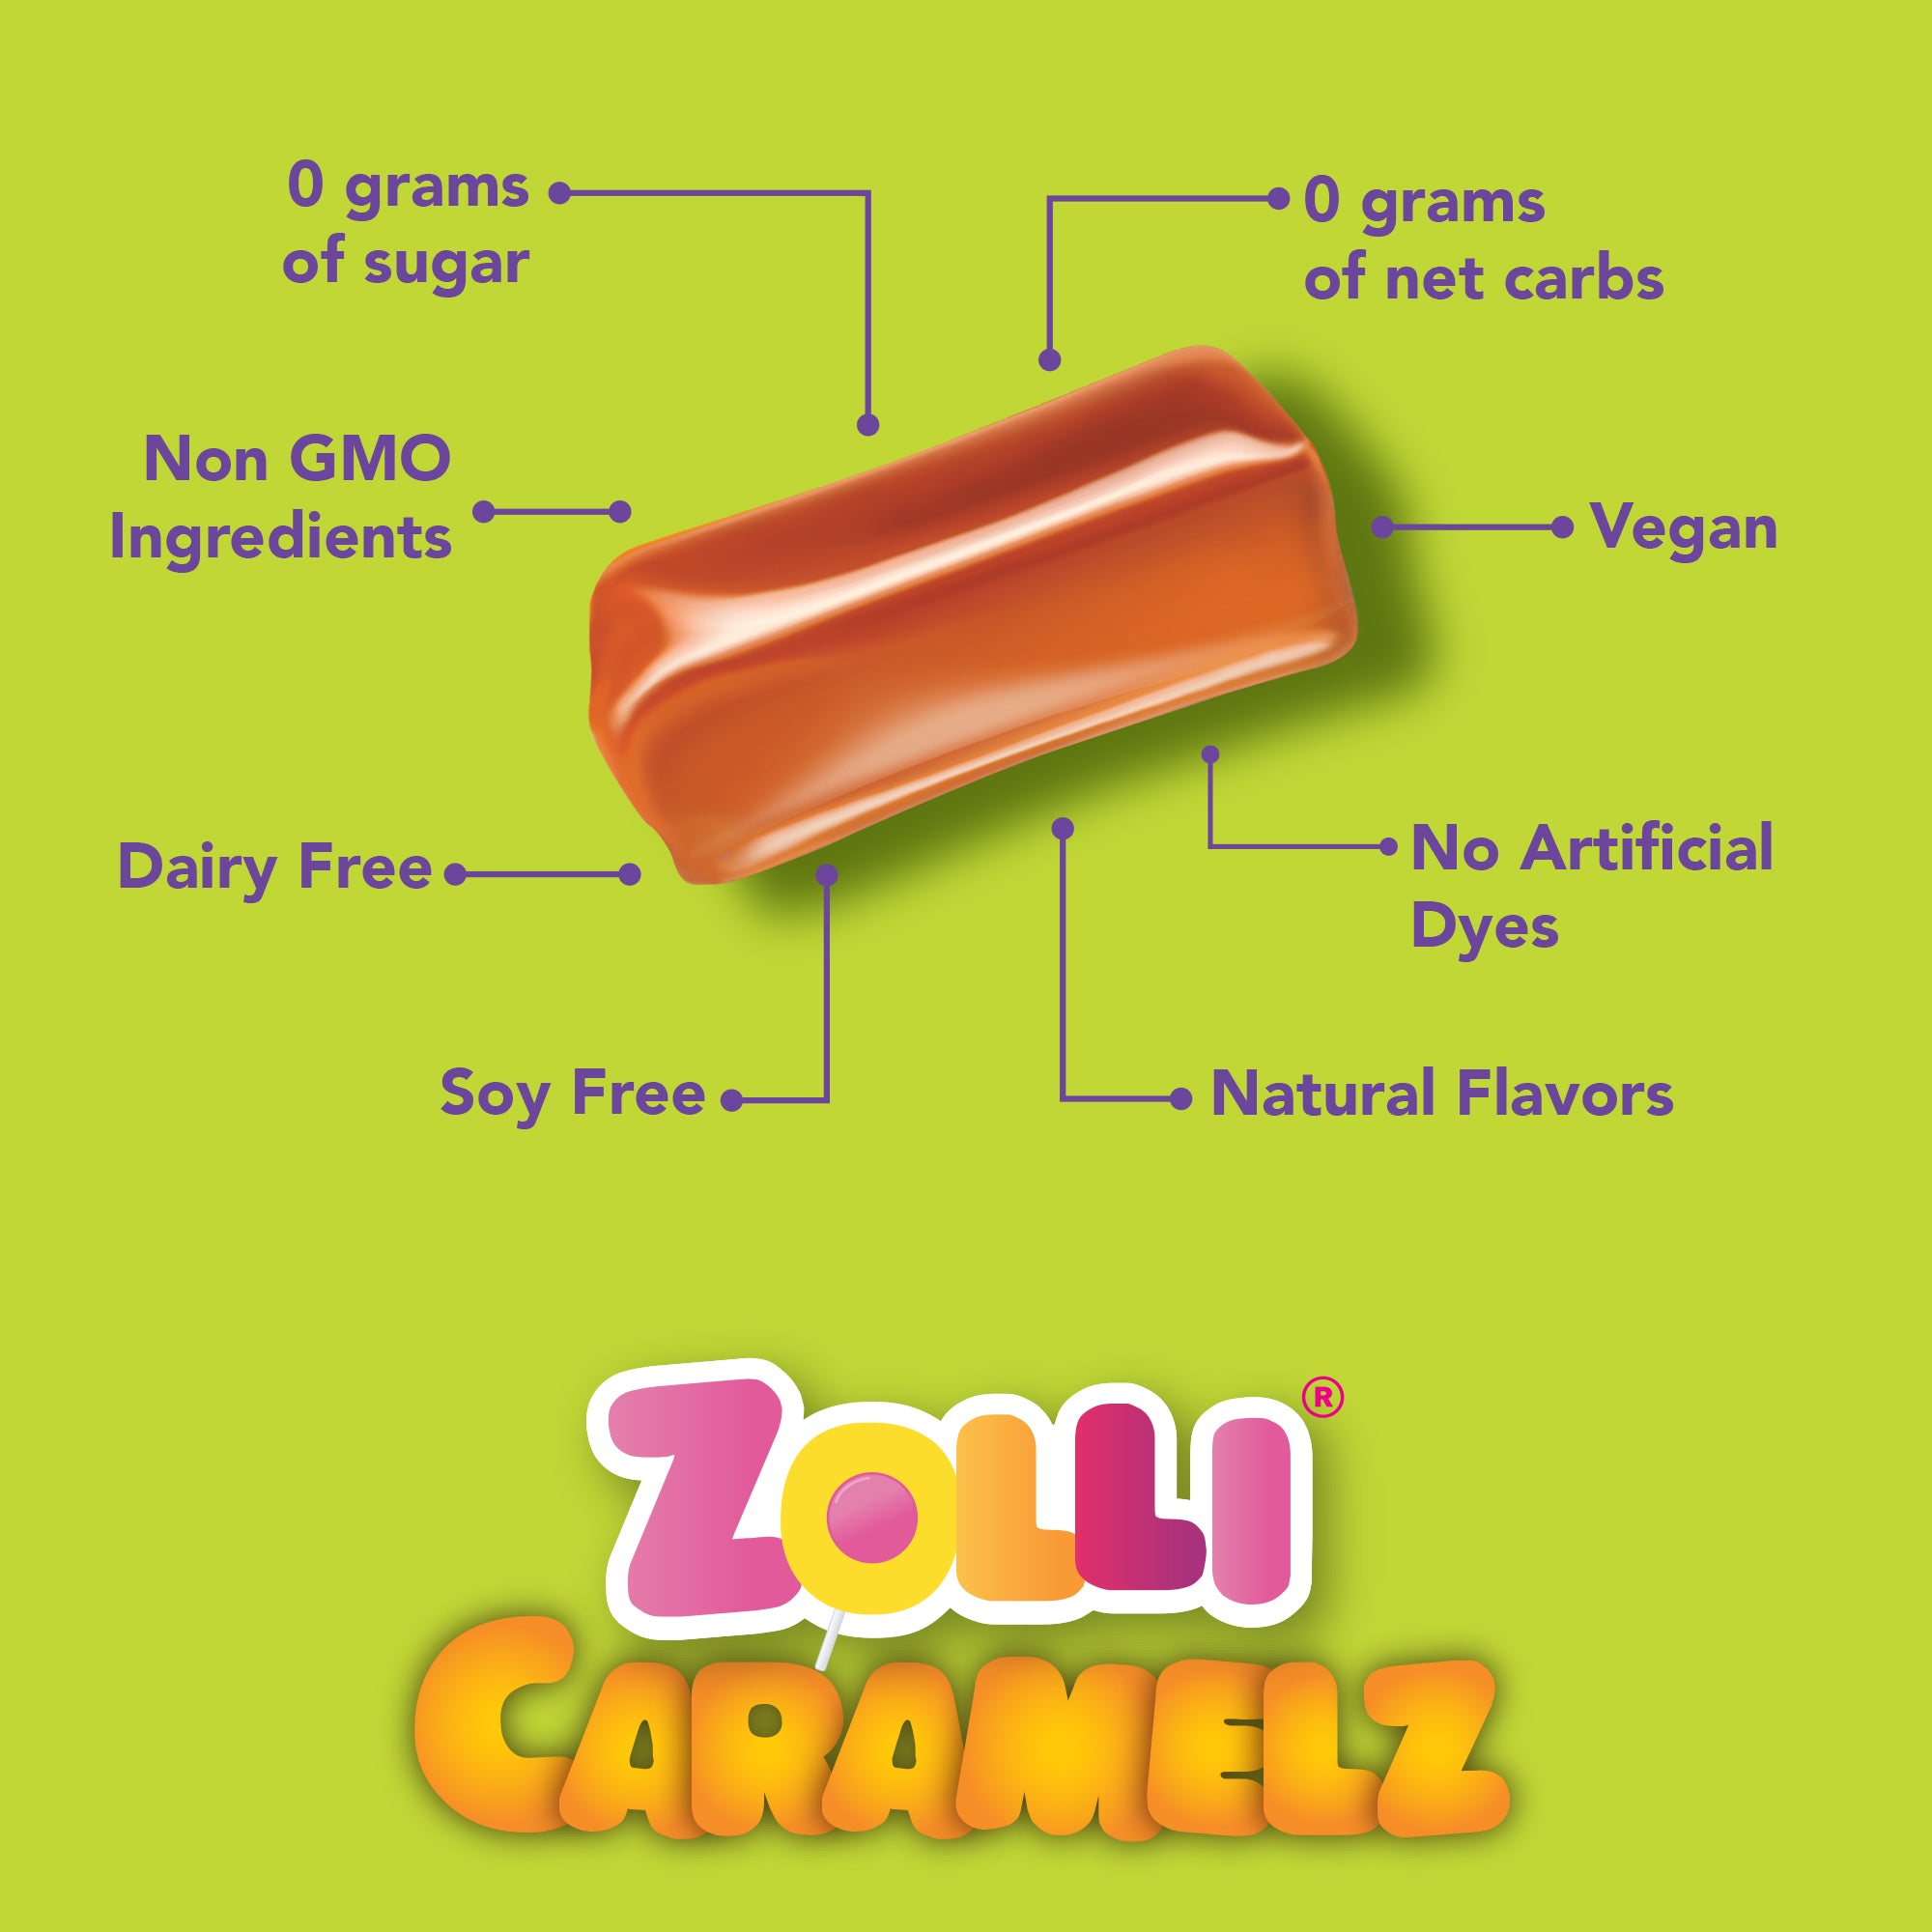 Zolli Caramelz have 0 grams of sugar, are dairy free, vegan, non gmo, have 0 grams of net carbs, and no artificial dyes.